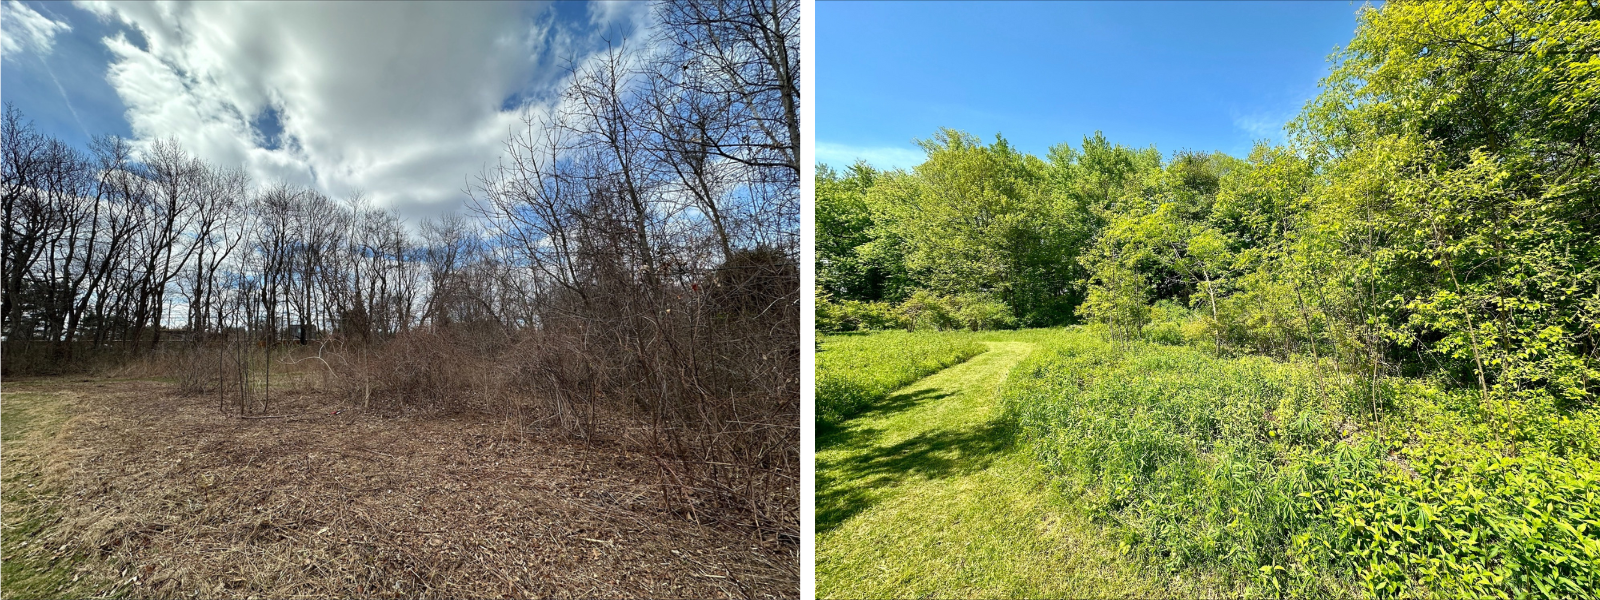 (Left) A field in early spring that was recently mowed. The field and the surrounding trees are leafless. (Right) A field in late spring, with many green plants growing and leafy trees in the back ground.